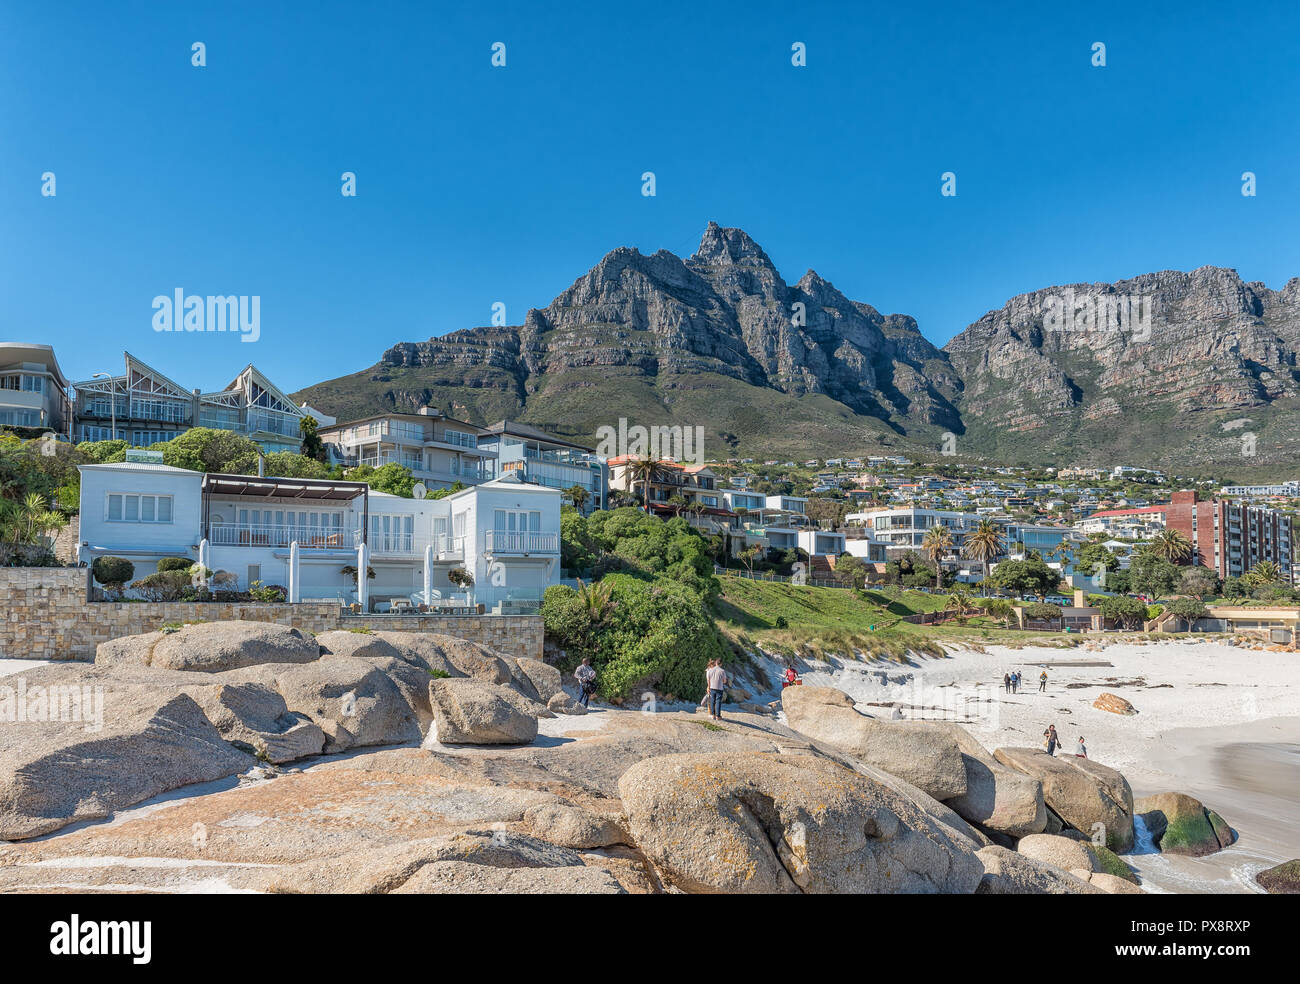 CAPE TOWN, SOUTH AFRICA, AUGUST 9, 2018: Side view of Table Mountain from a beach in Camps Bay. The upper cable station is visible on the highest poin Stock Photo